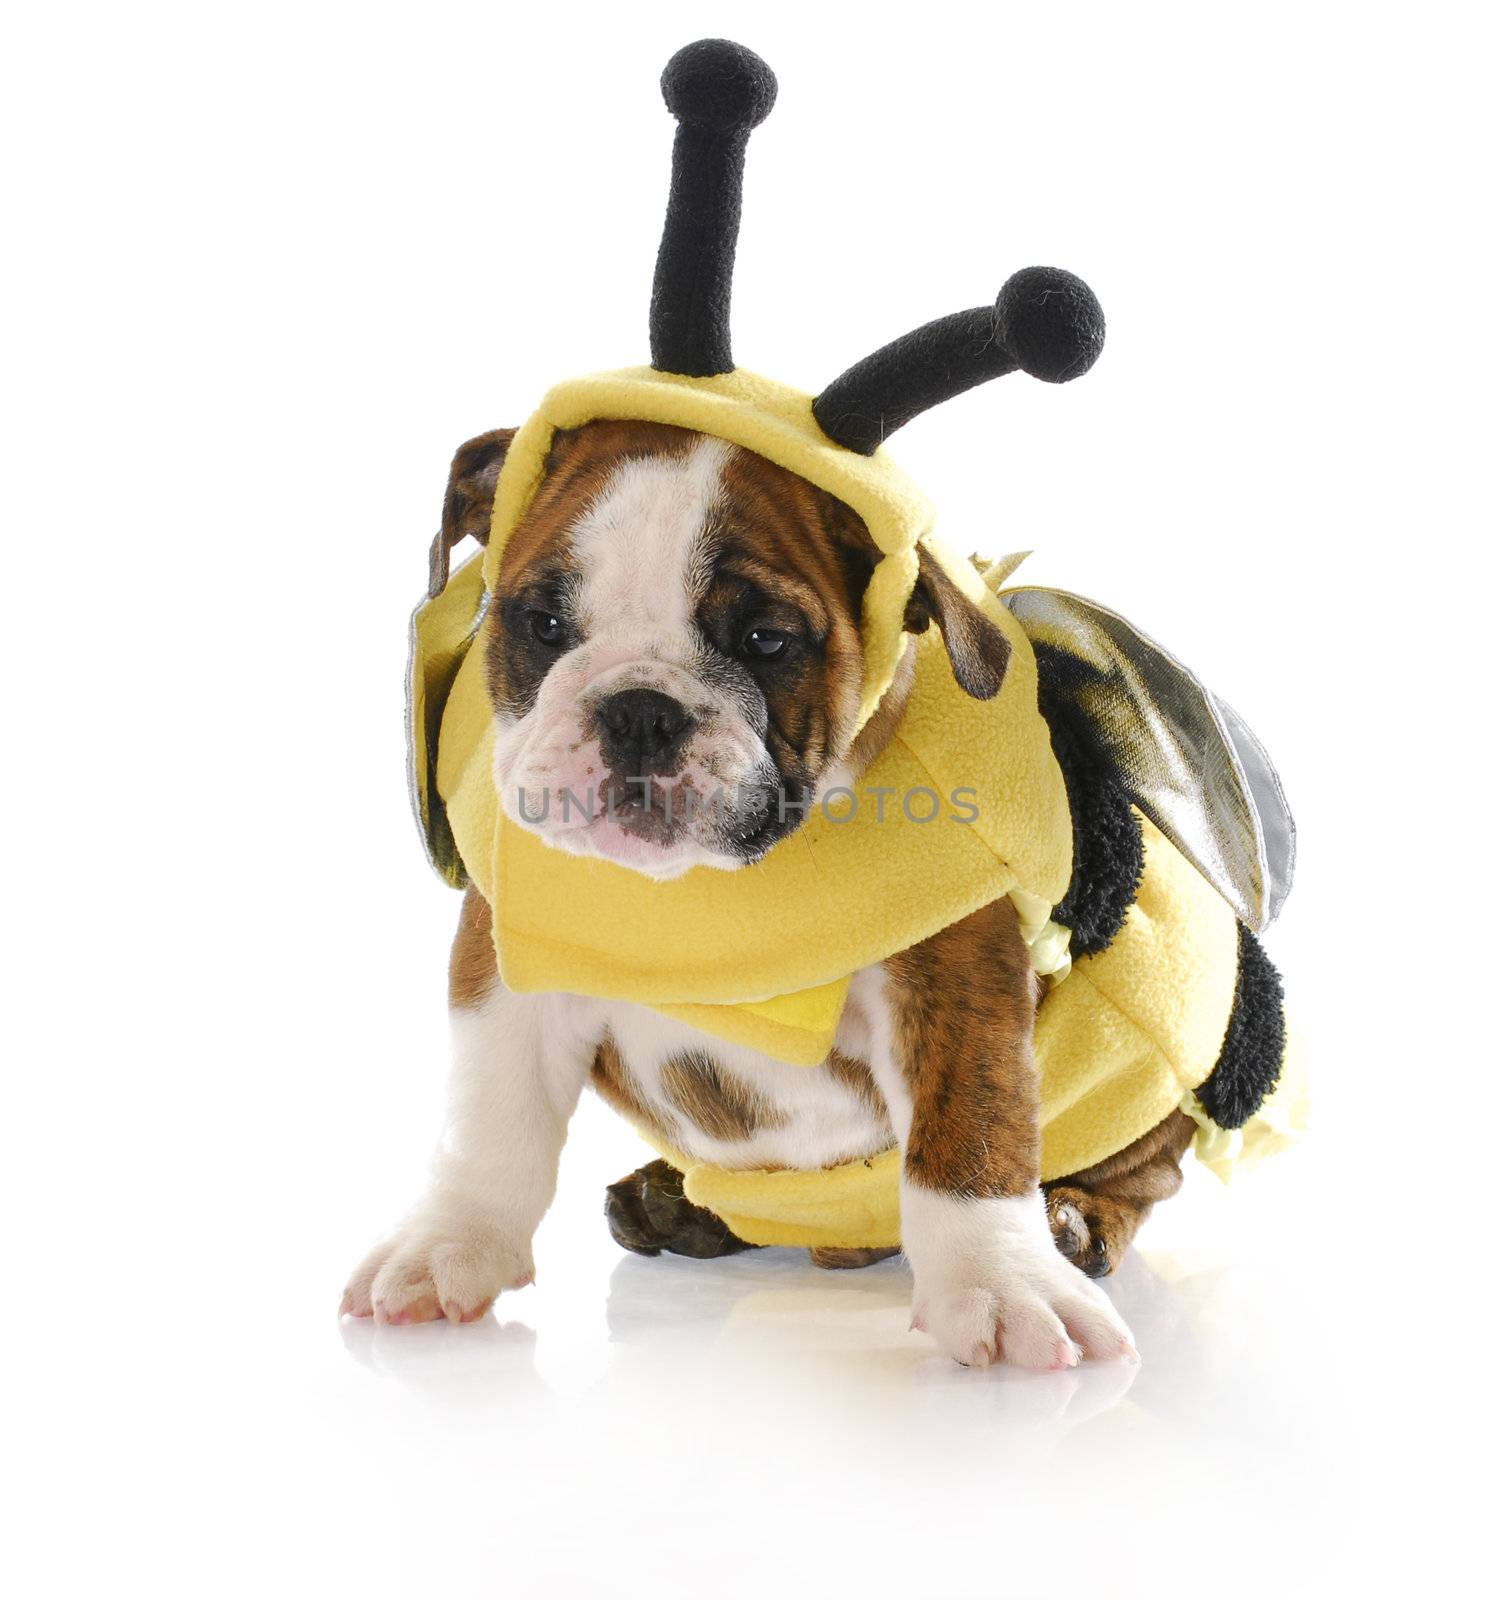 adorable eight week old english bulldog puppy wearing bumble bee costume with reflection on white background